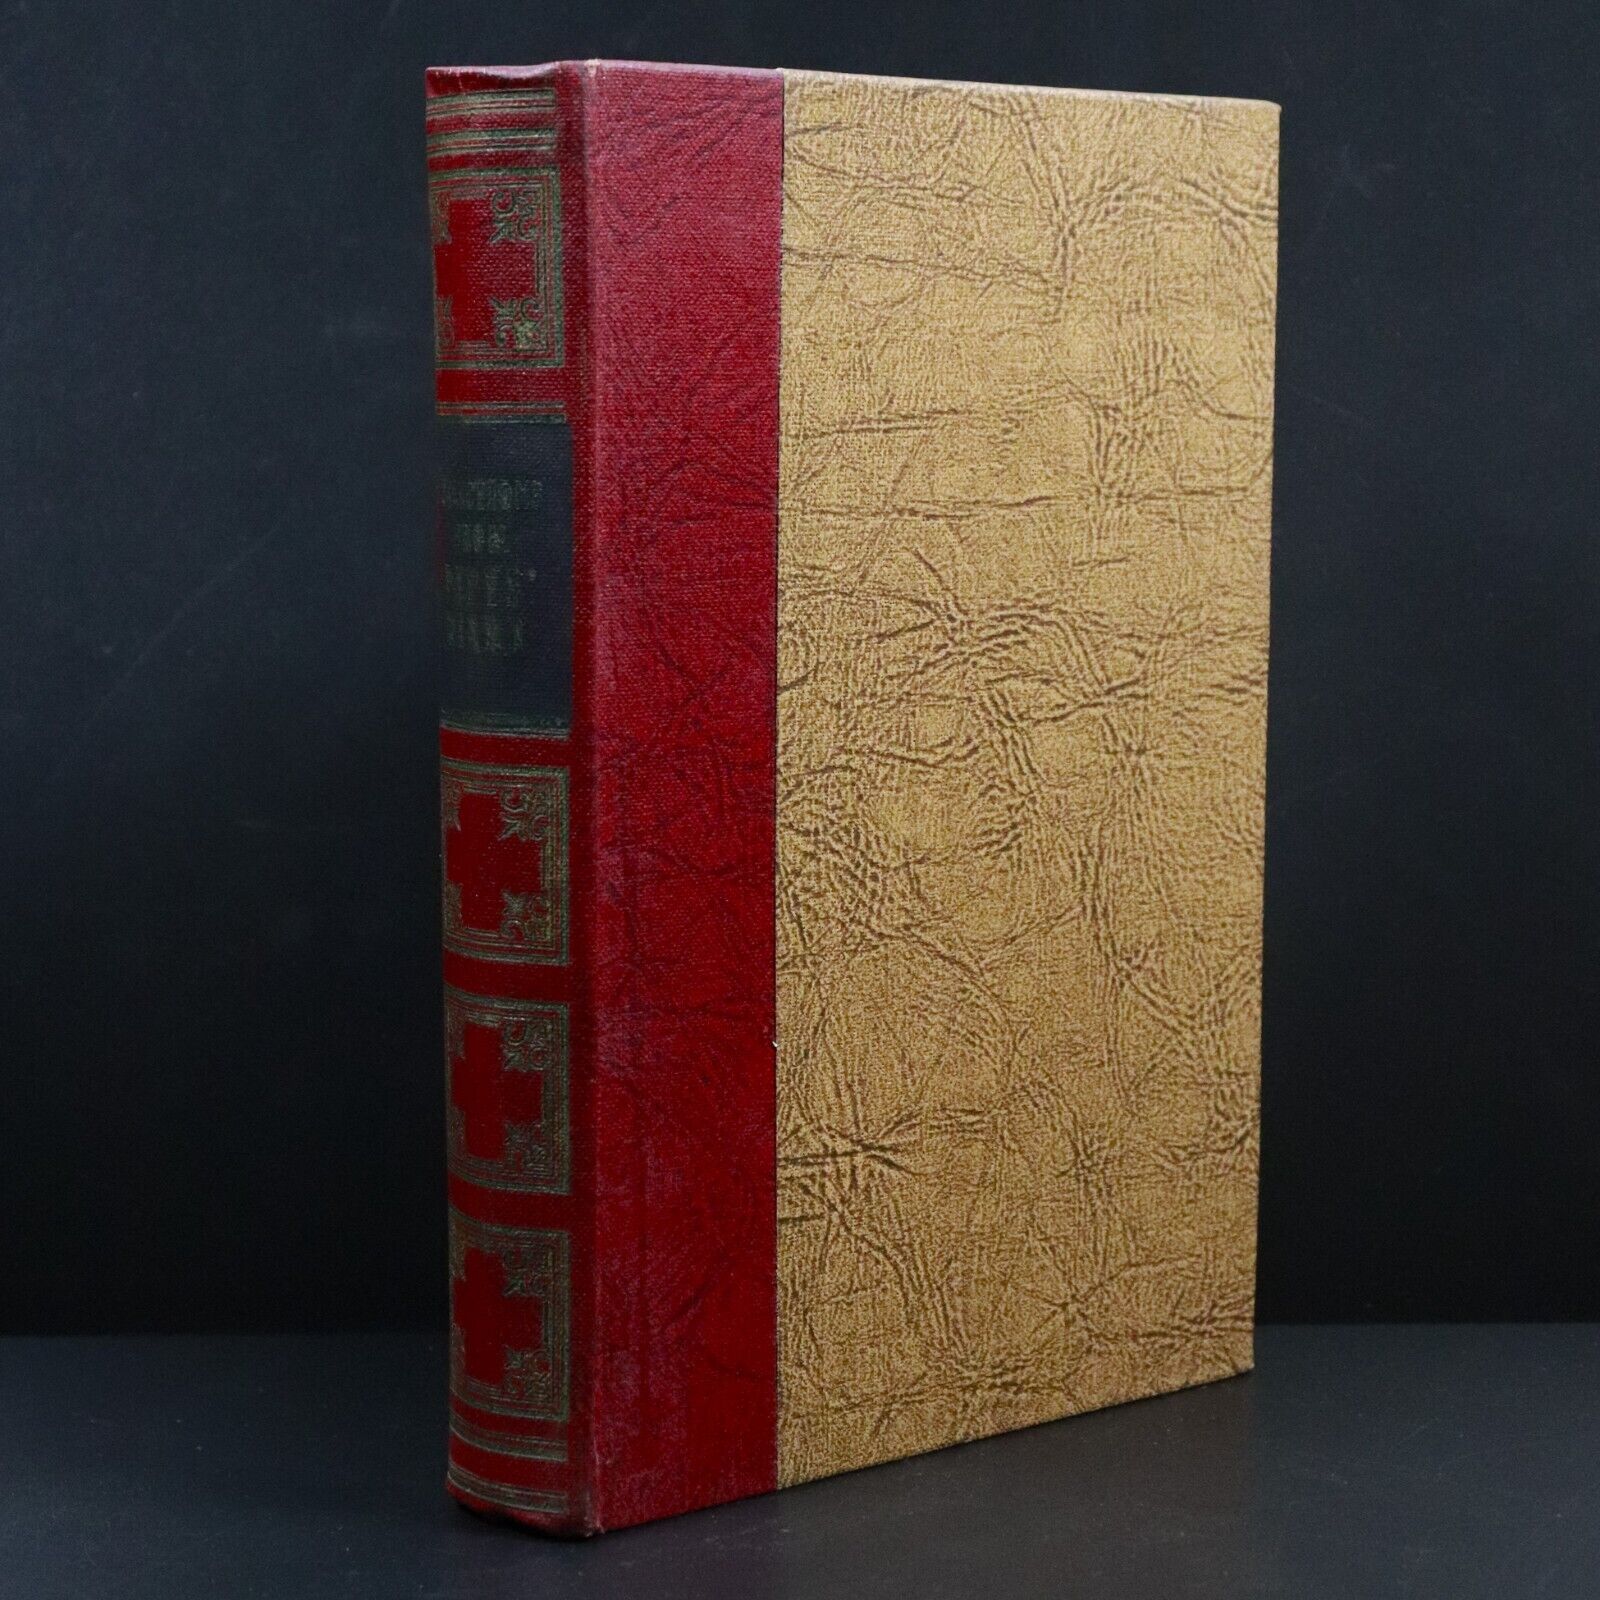 c1950 Selections From Diary Of Samuel Pepys - Art Type Edition - History Book